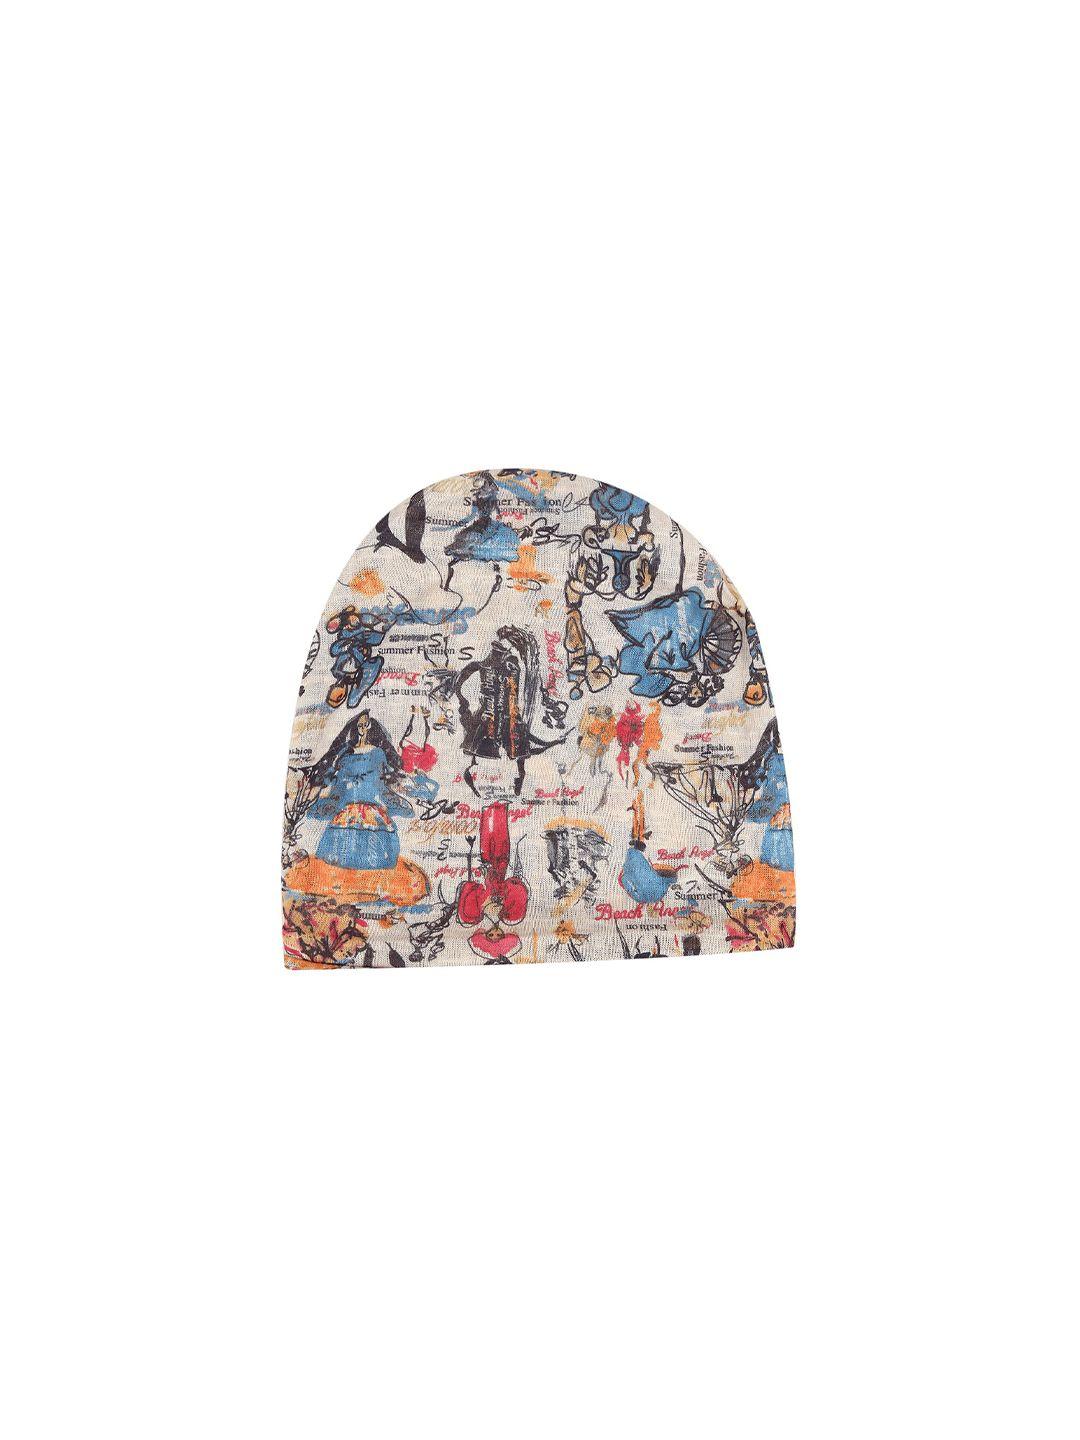 isweven unisex white & blue printed beanie